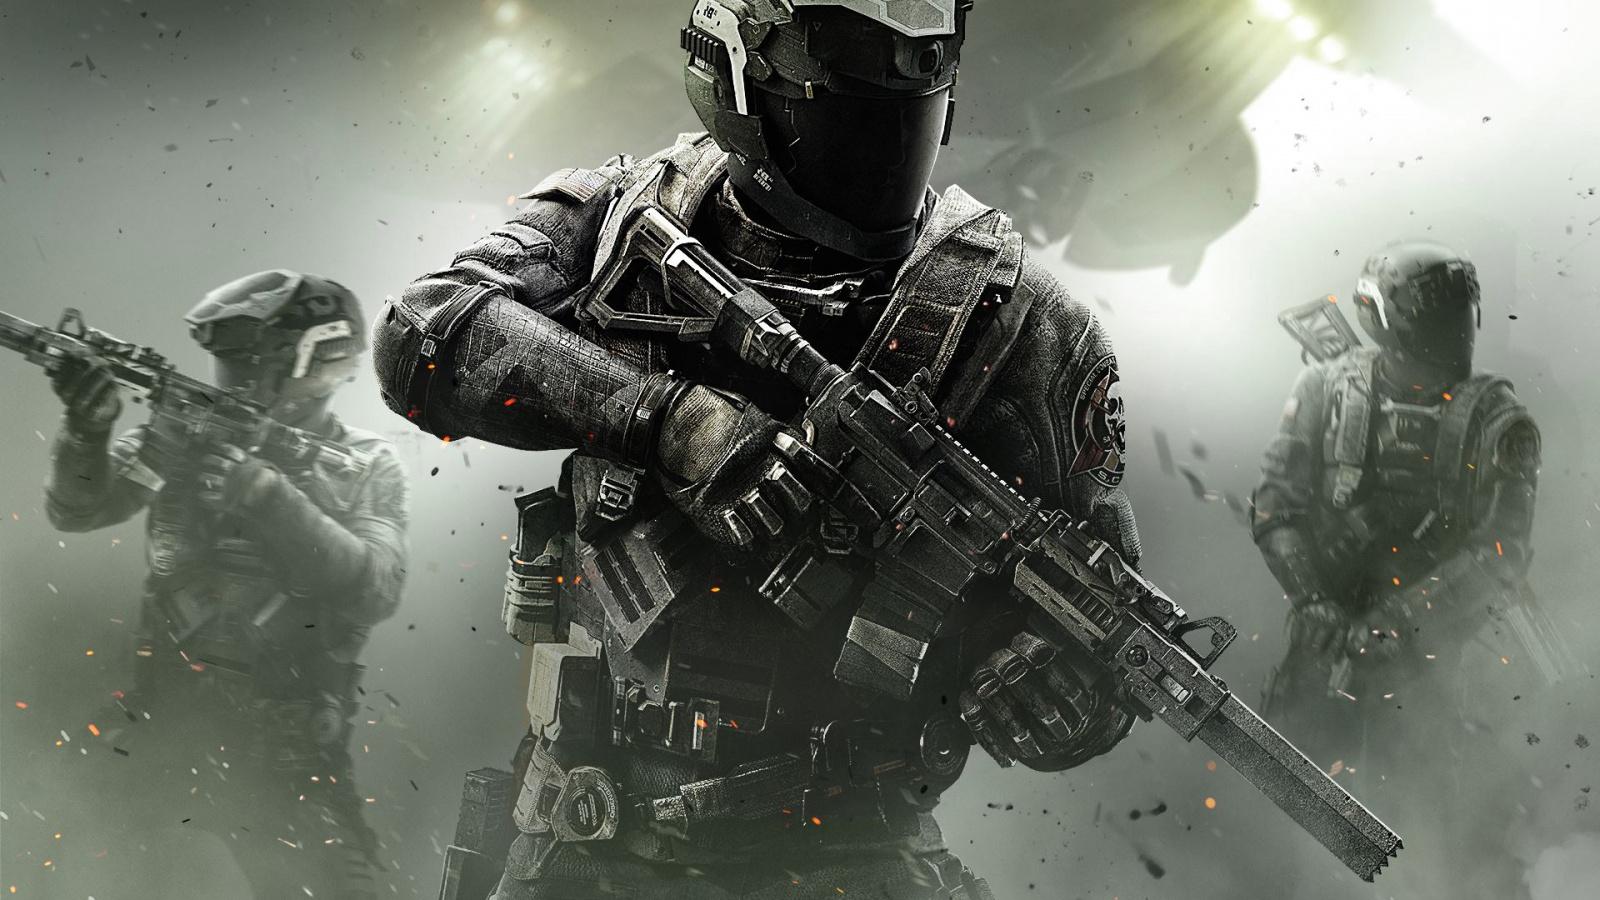 Download 1600x900 Wallpaper Army, Call of Duty Black Ops Call